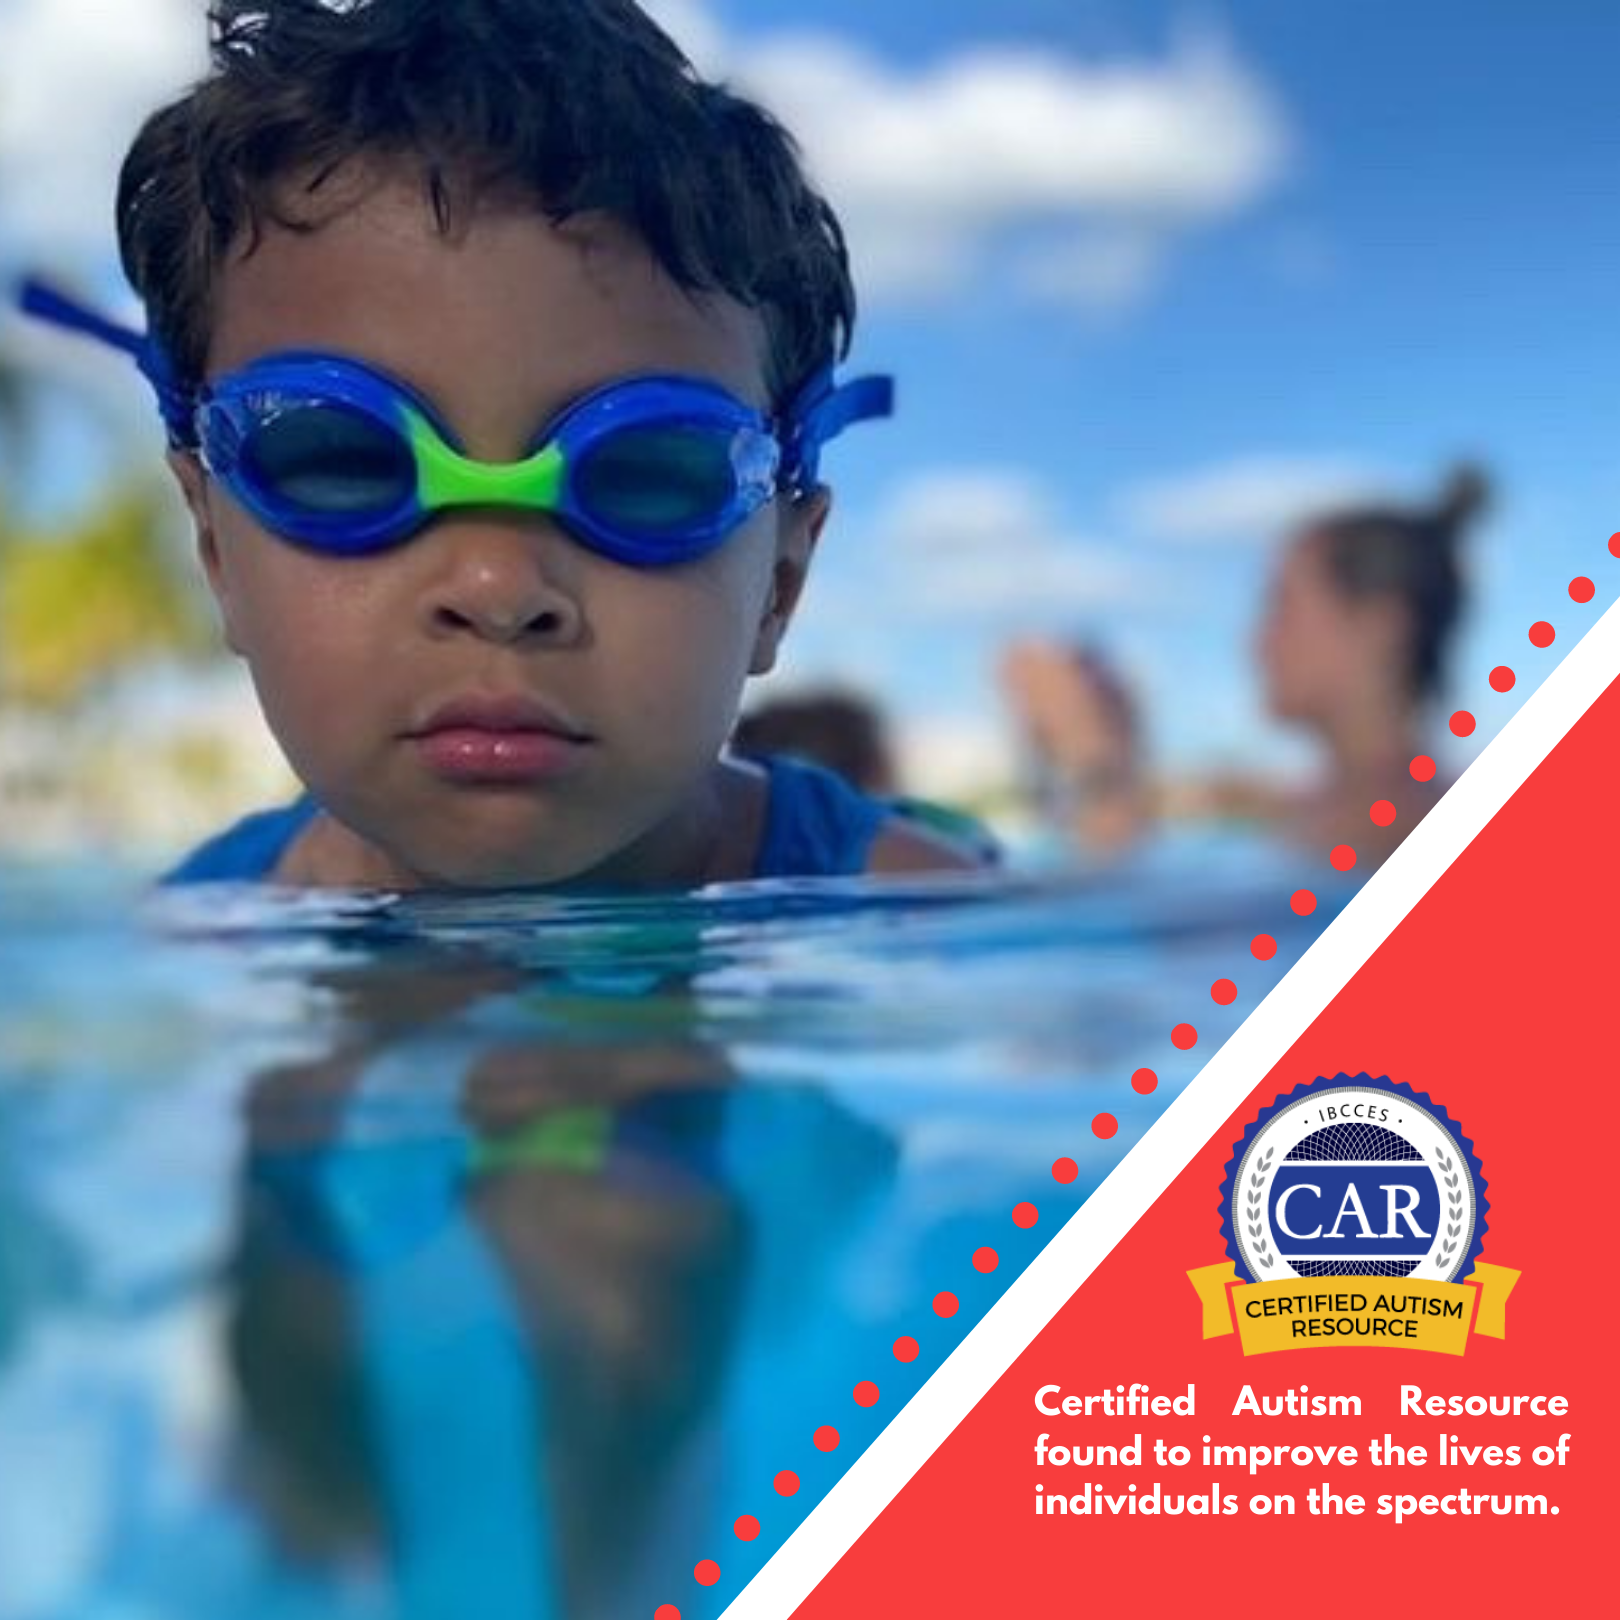 Young boy with dark hair wearing blue Frogglez swim goggles raises his head out of a swimming pool and looks directly at the camera. Behind him is a blurred image of adults. Text reads: Certified Autism Resource found to improve the lives of individuals on the spectrum.